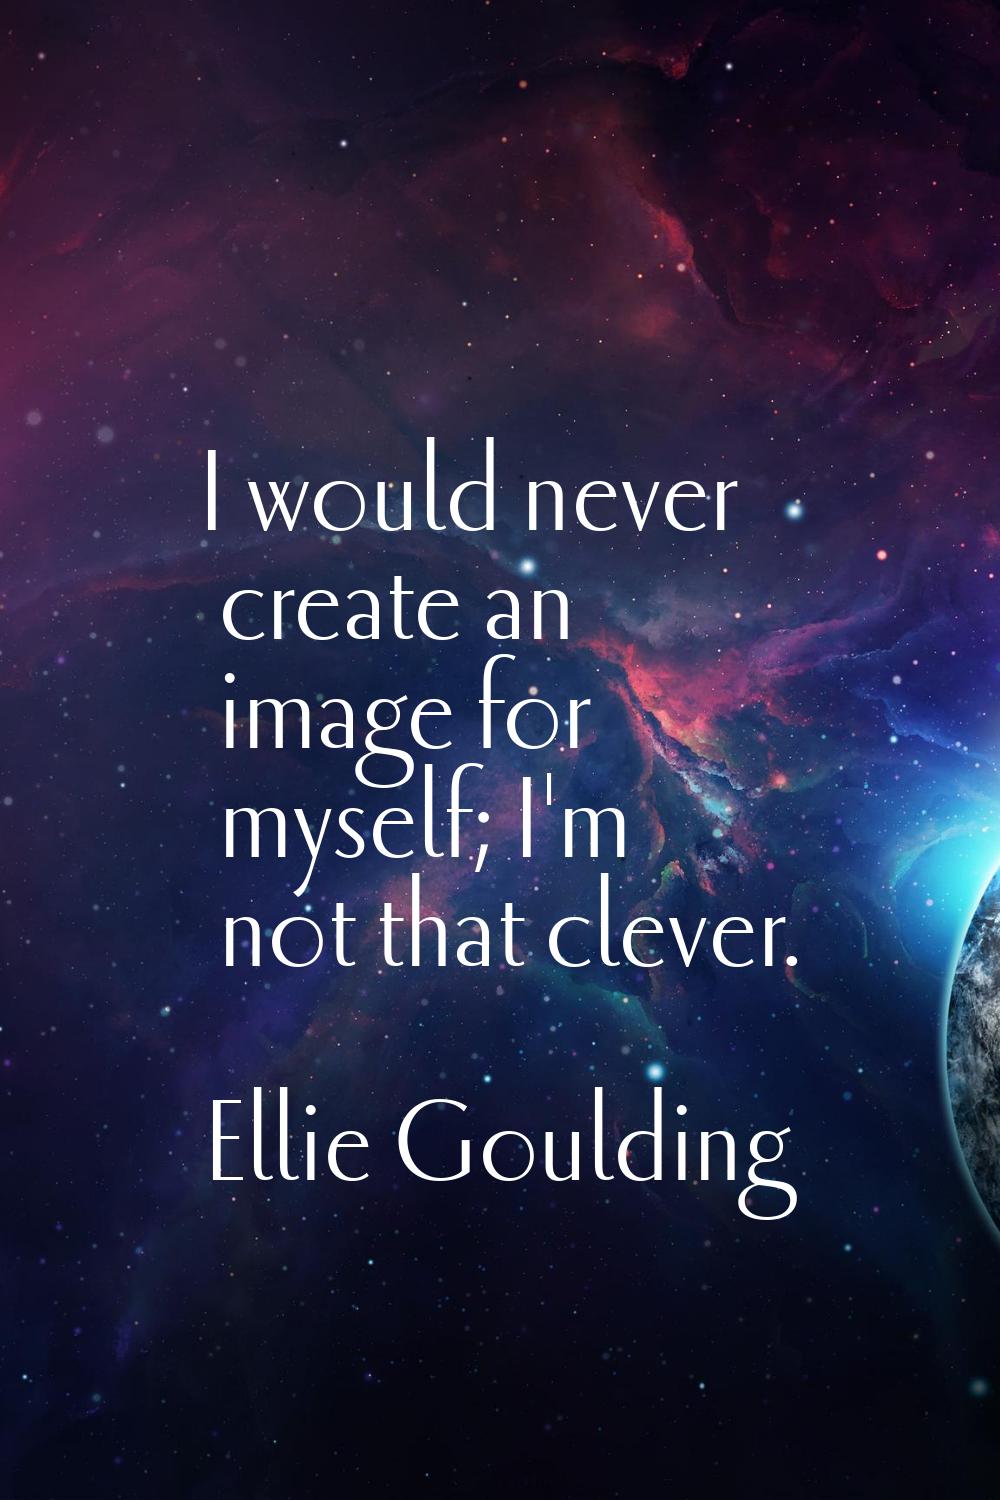 I would never create an image for myself; I'm not that clever.